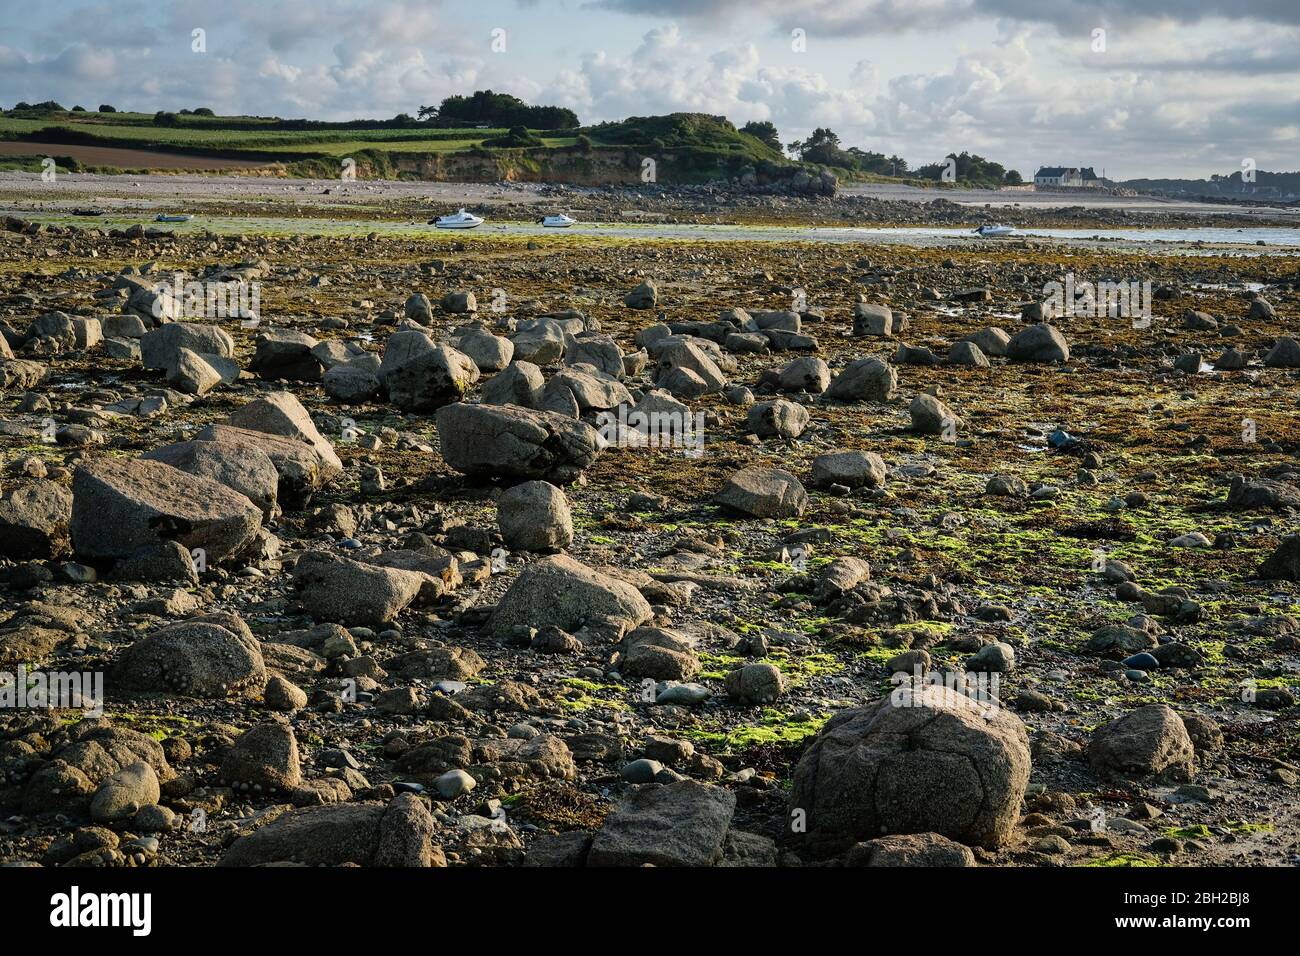 July 27, 2019, Pleubian, Côte d'Armor, Brittany, France - Beach at low tide in Brittany with exposed rocks and boats on the ground Stock Photo